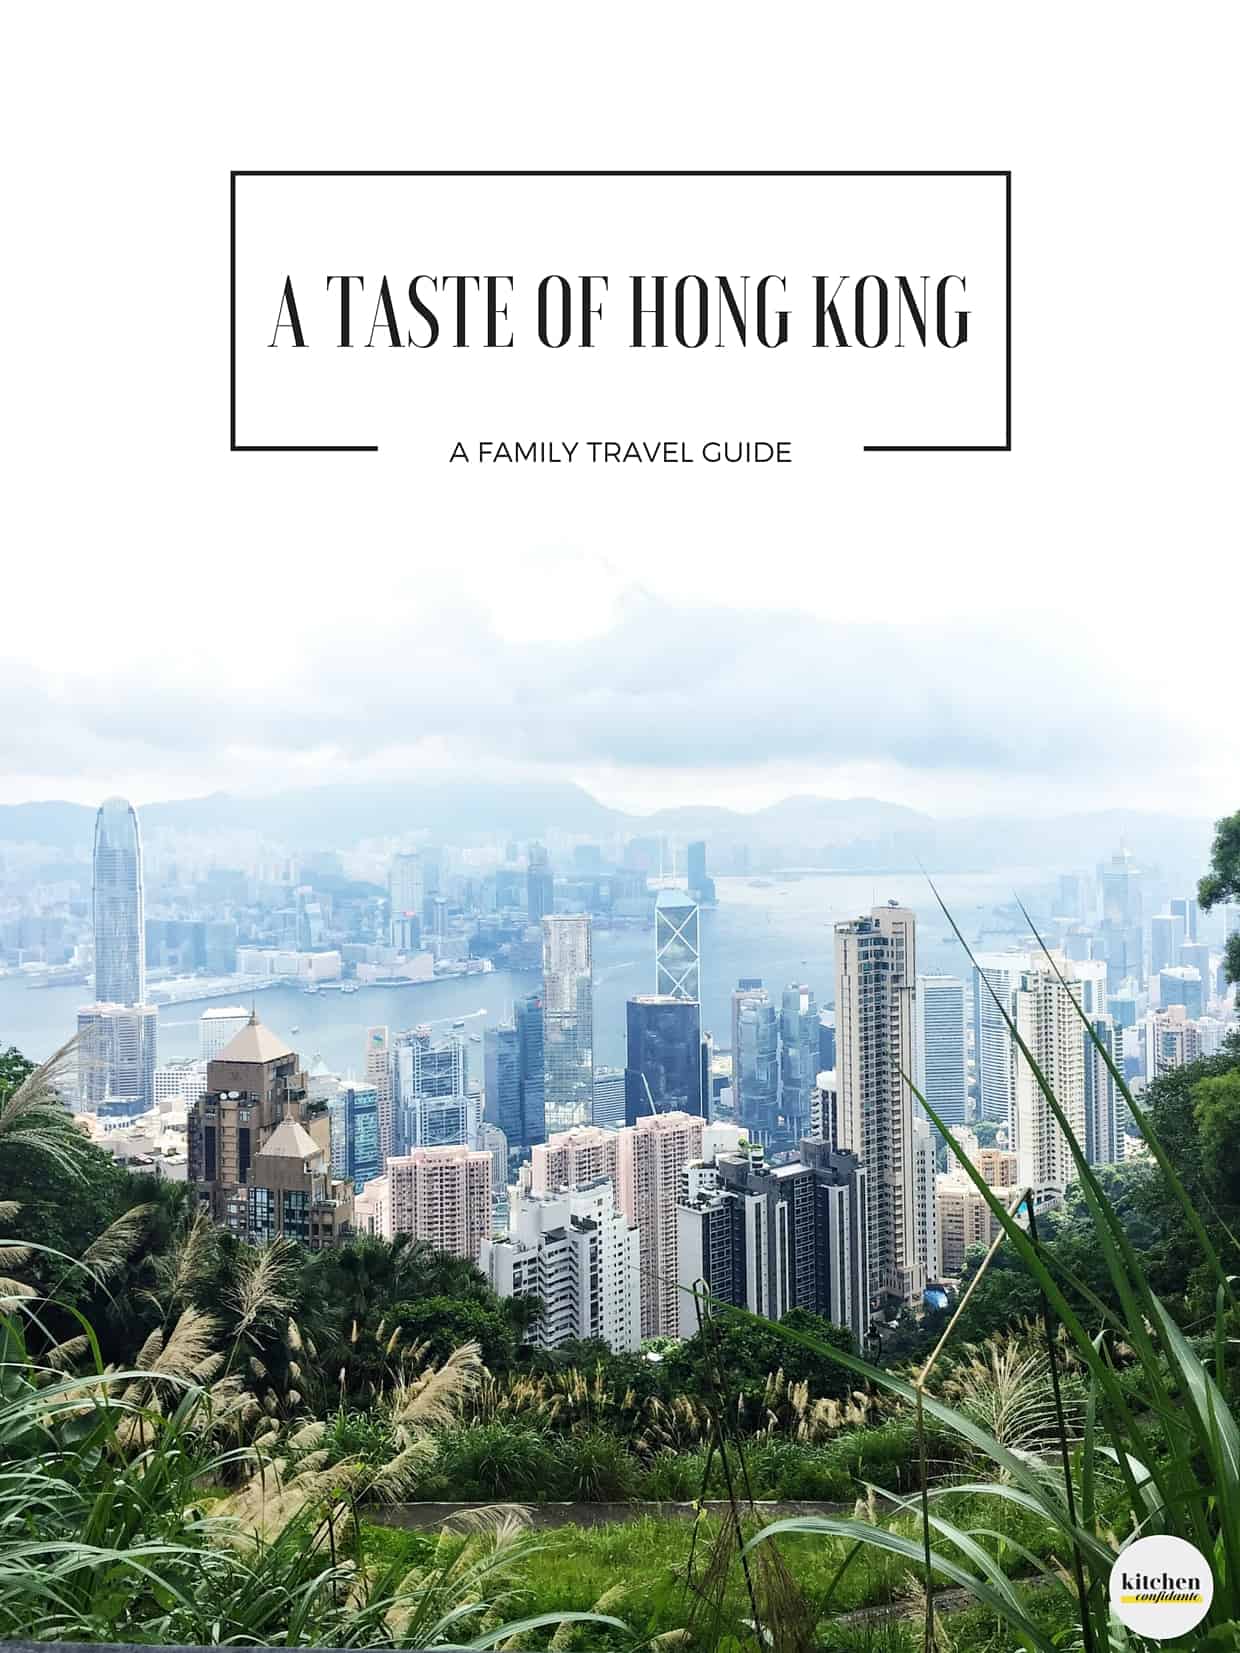 An image of Hong Kong, with a text overlay that says, "A taste of Hong Kong: a family travel guide". This includes all the information you'll need for a hong kong travel guide. 